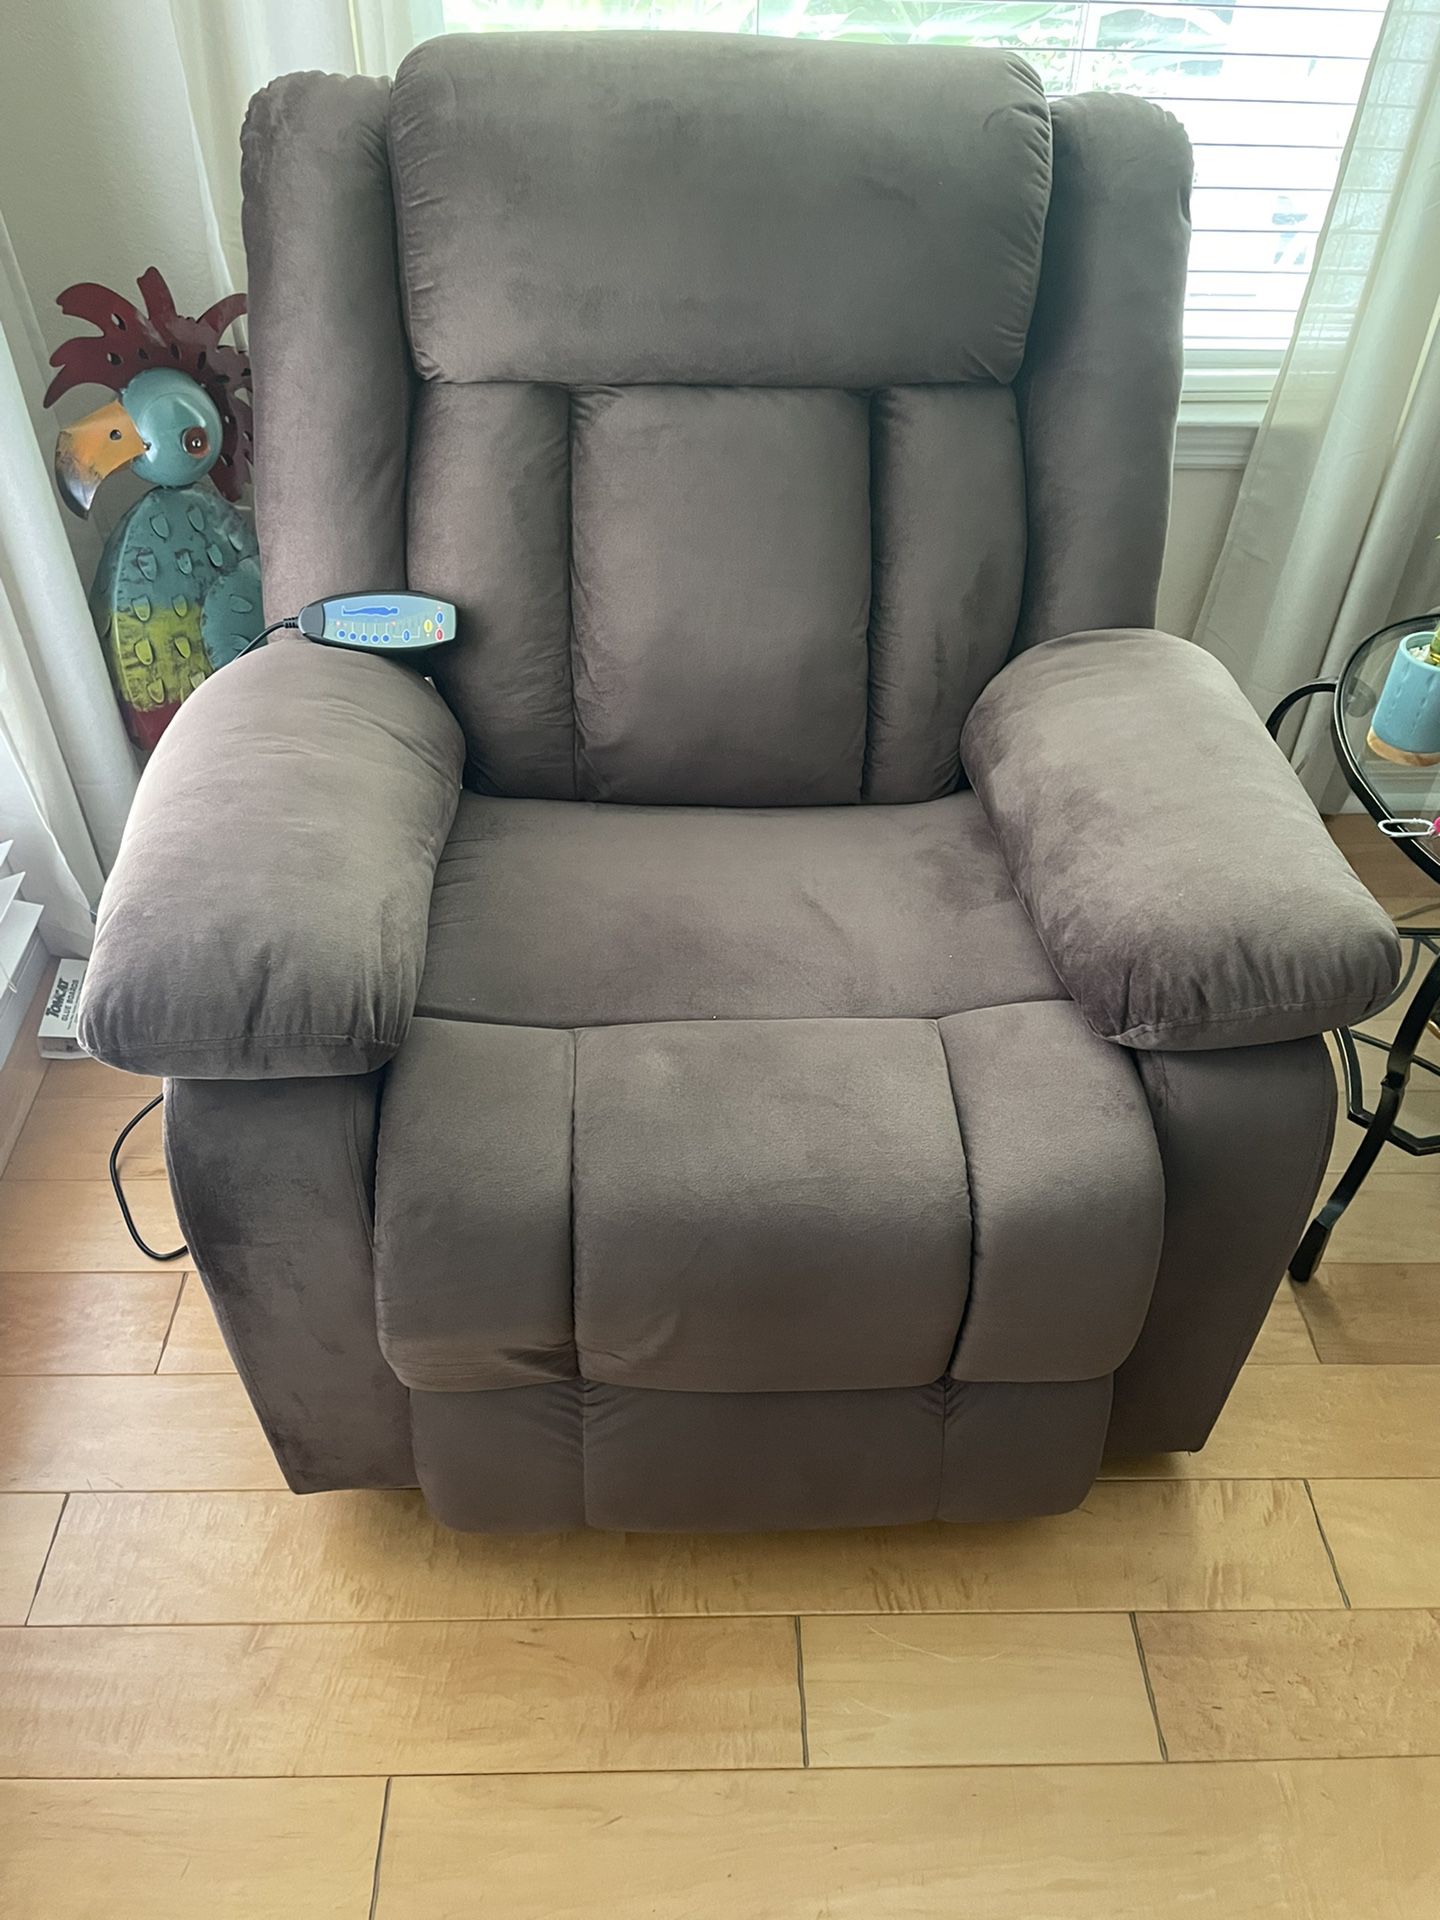 1 Ea. Electric Recliner Chair